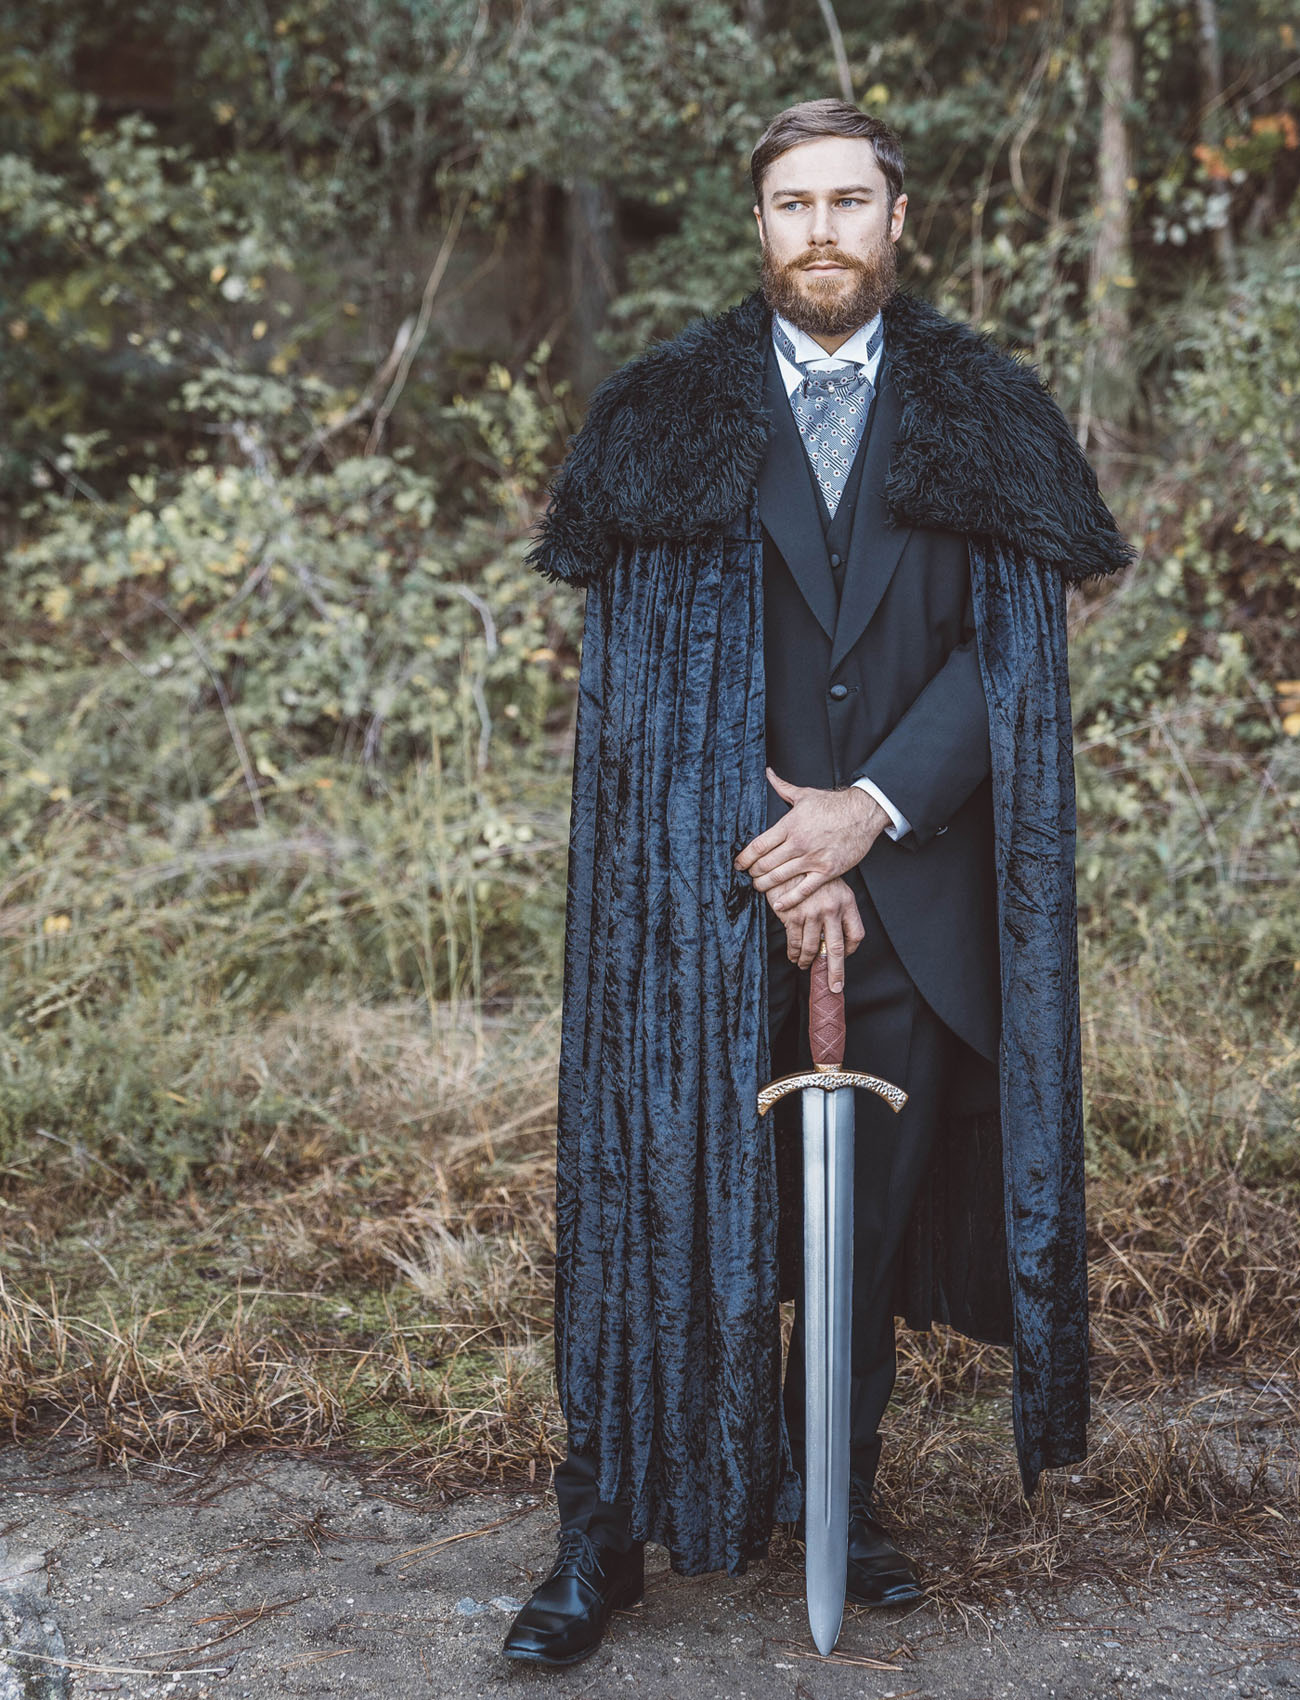 The groom may add a fur coverup and a sword to his look to remind of Jon Snow